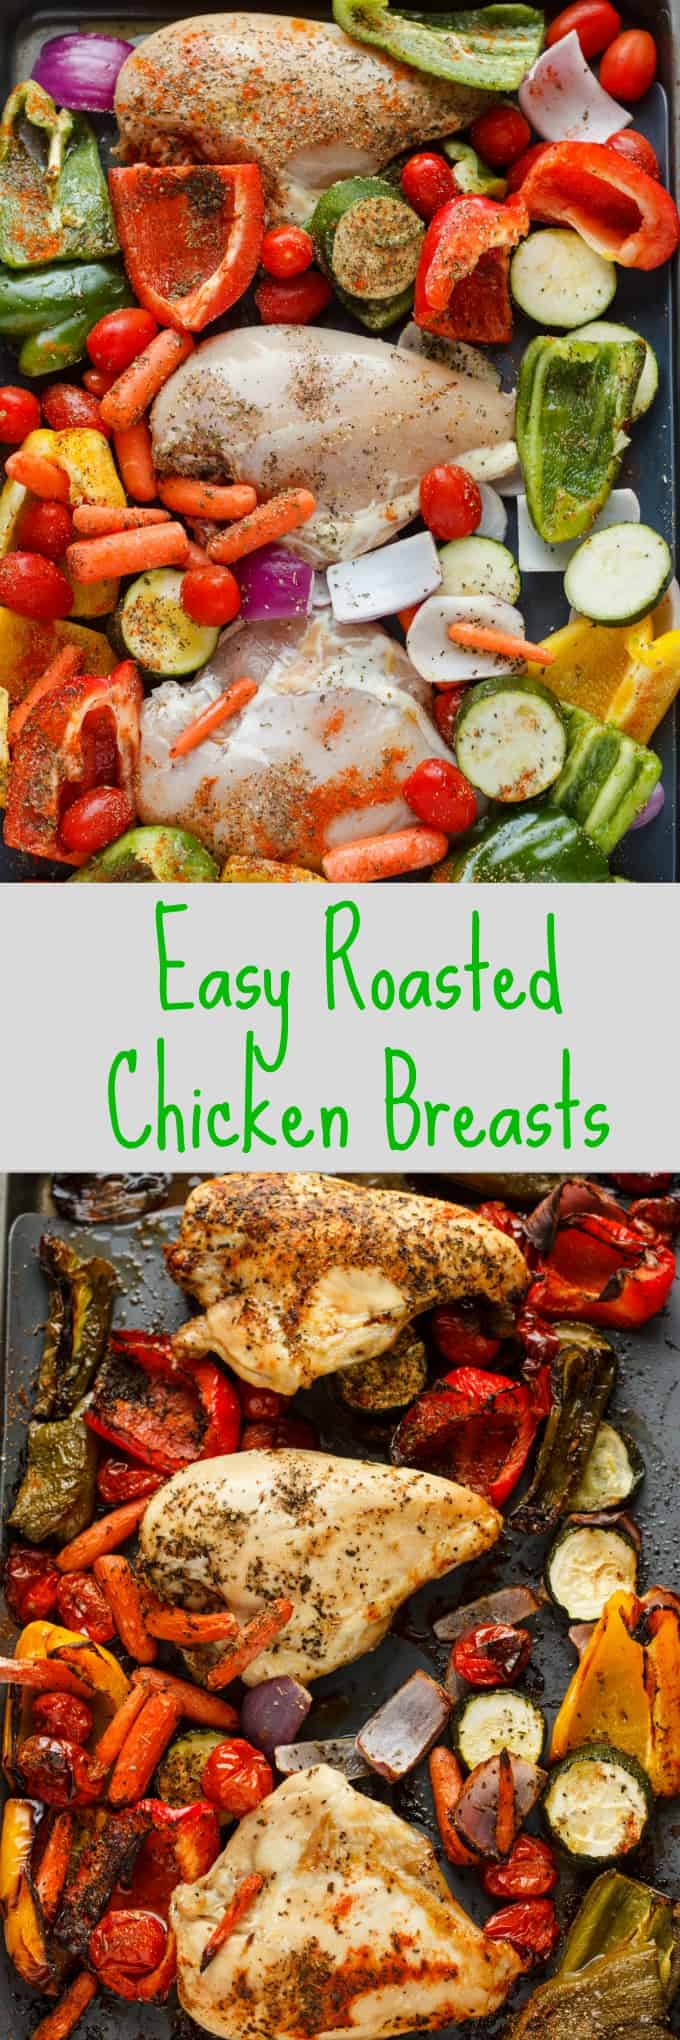 Roasted Bone-In Chicken Breasts with Vegetables 1